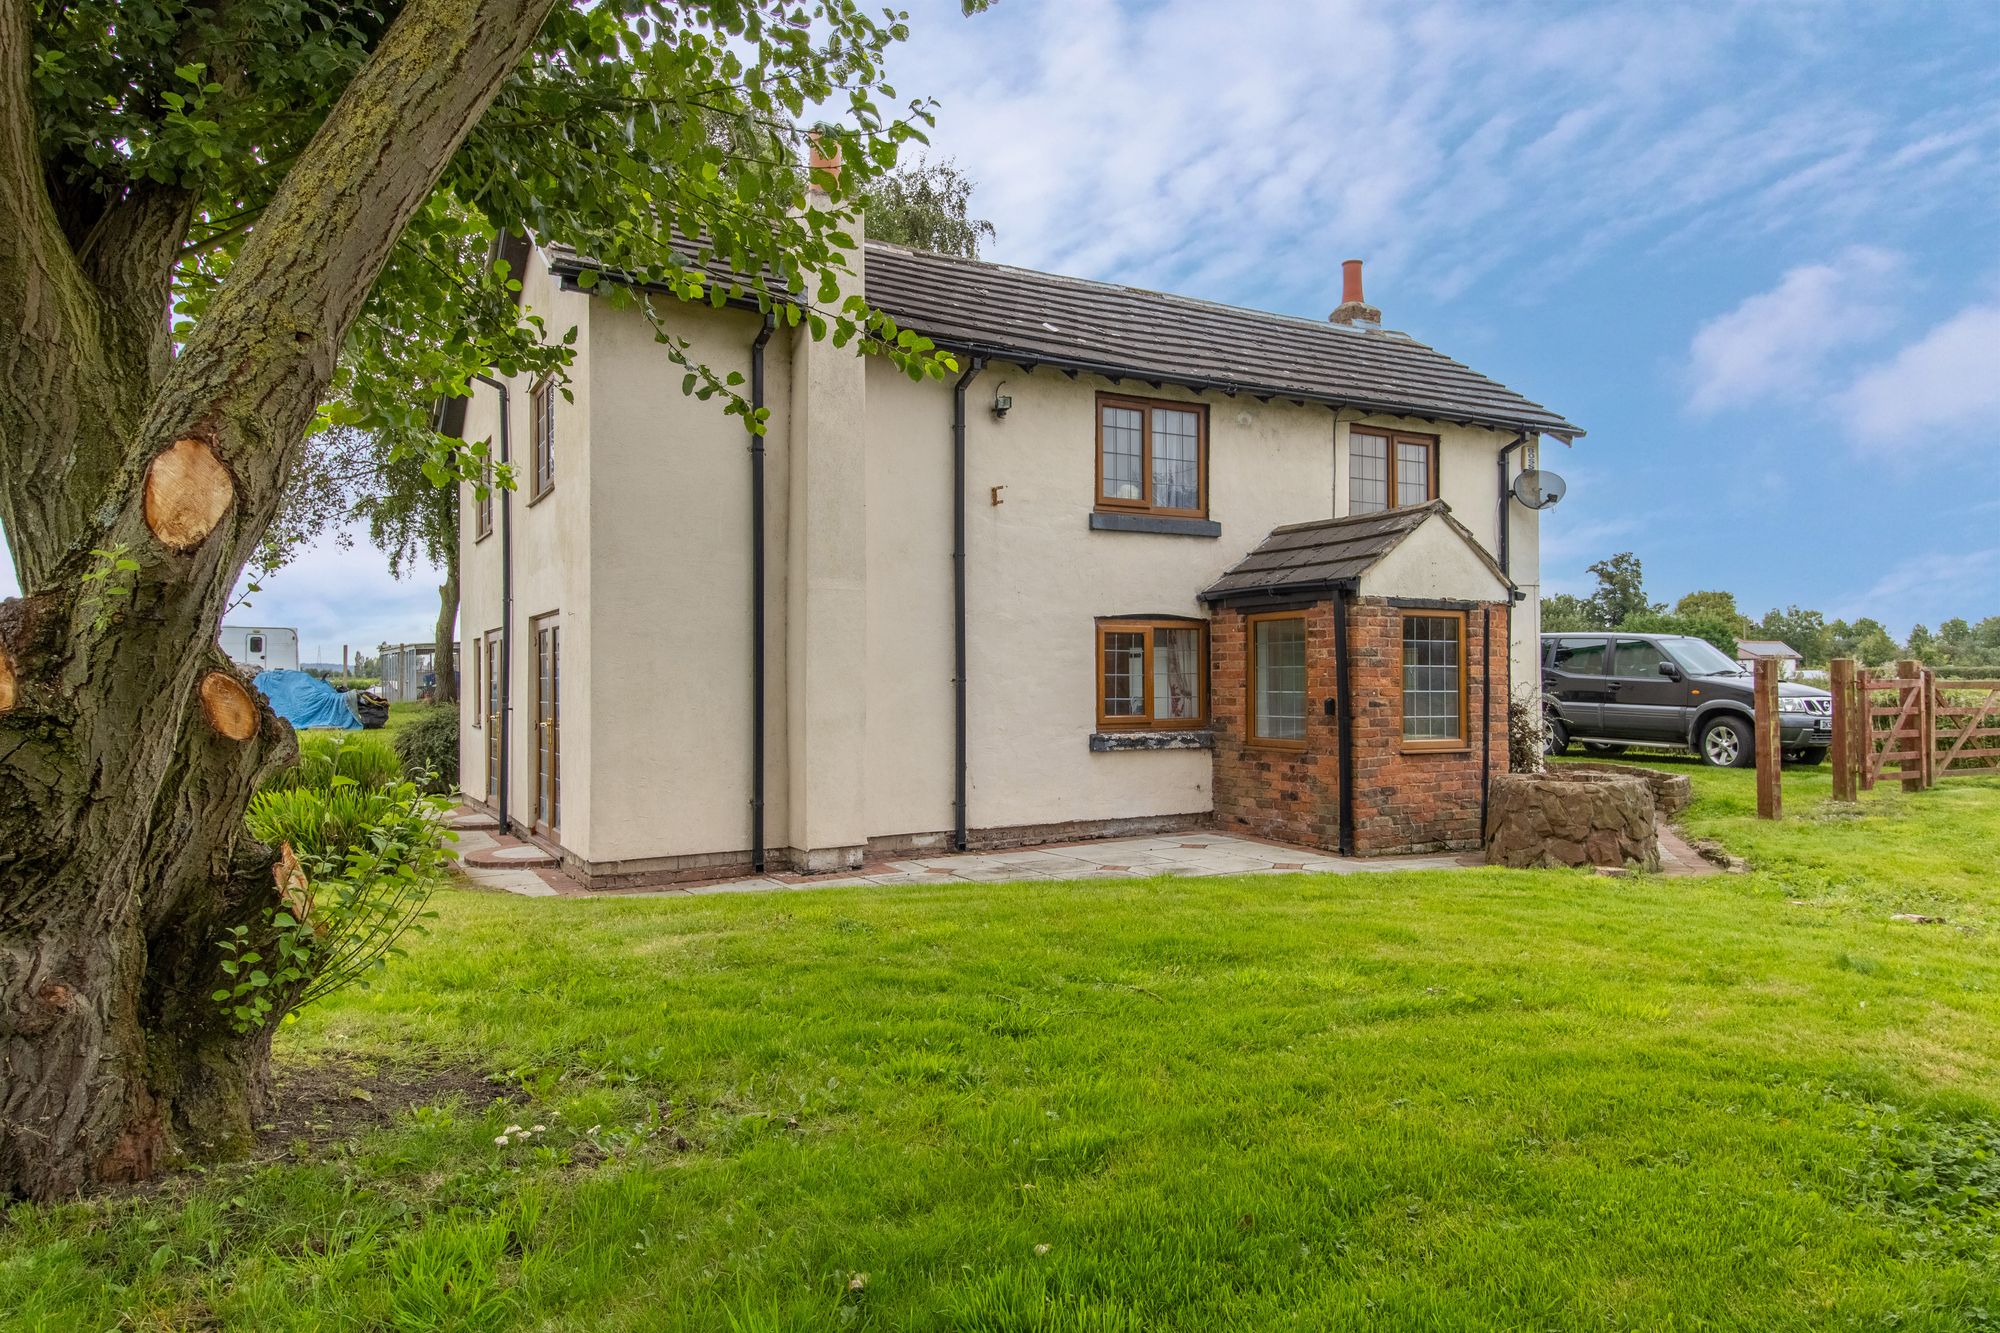 Introducing Middlefield Farm Cottage - a charming historic cottage dating back to the 1800’s nestled in this incredible plot on Potters Lane. Surrounding this picturesque cottage are generous gardens that offer unobstructed 360-degree views of the breathtaking fields and countryside.